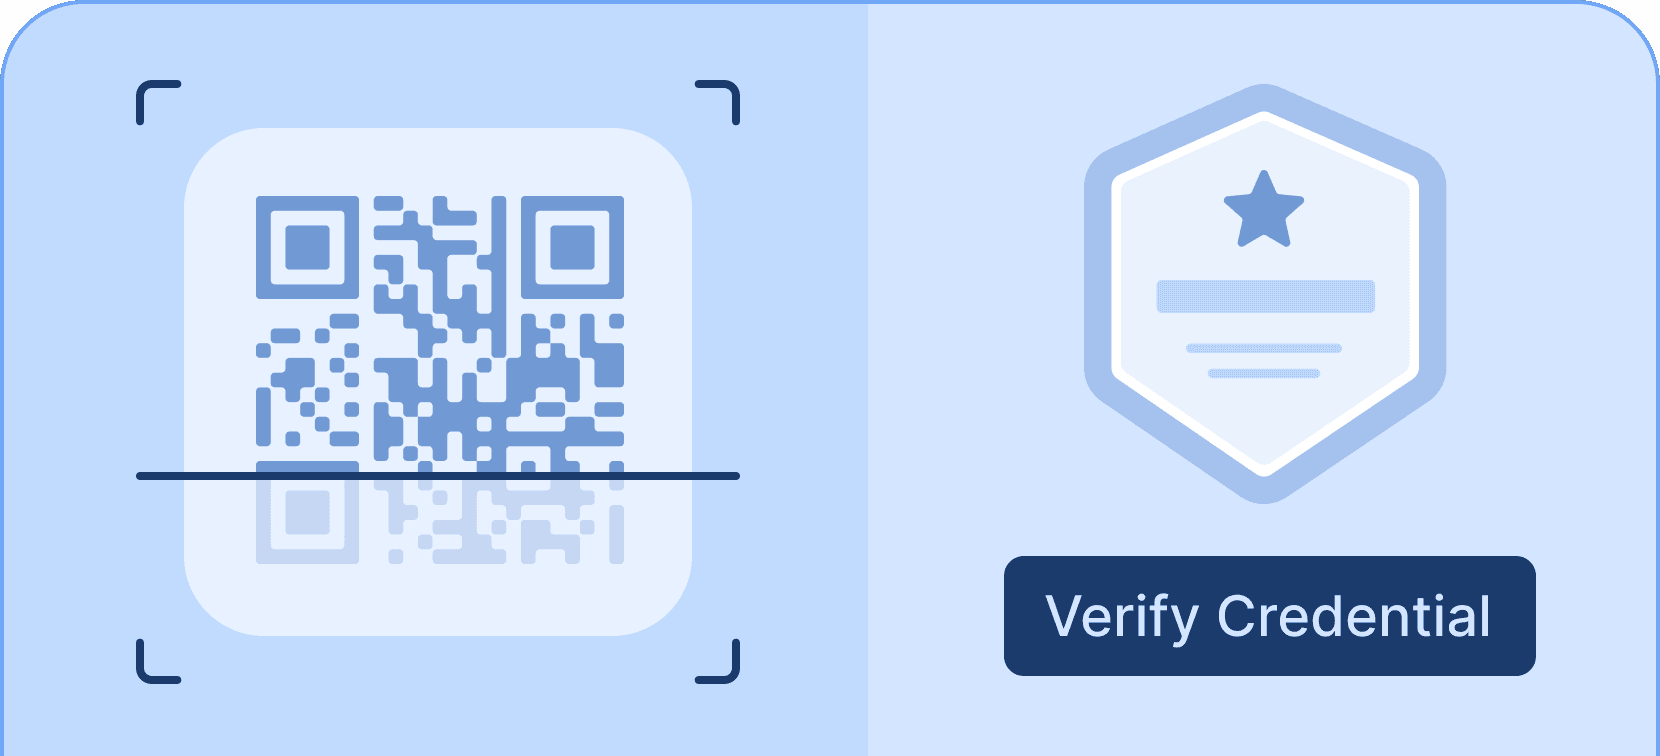 Verify credentials one click - Certifier features